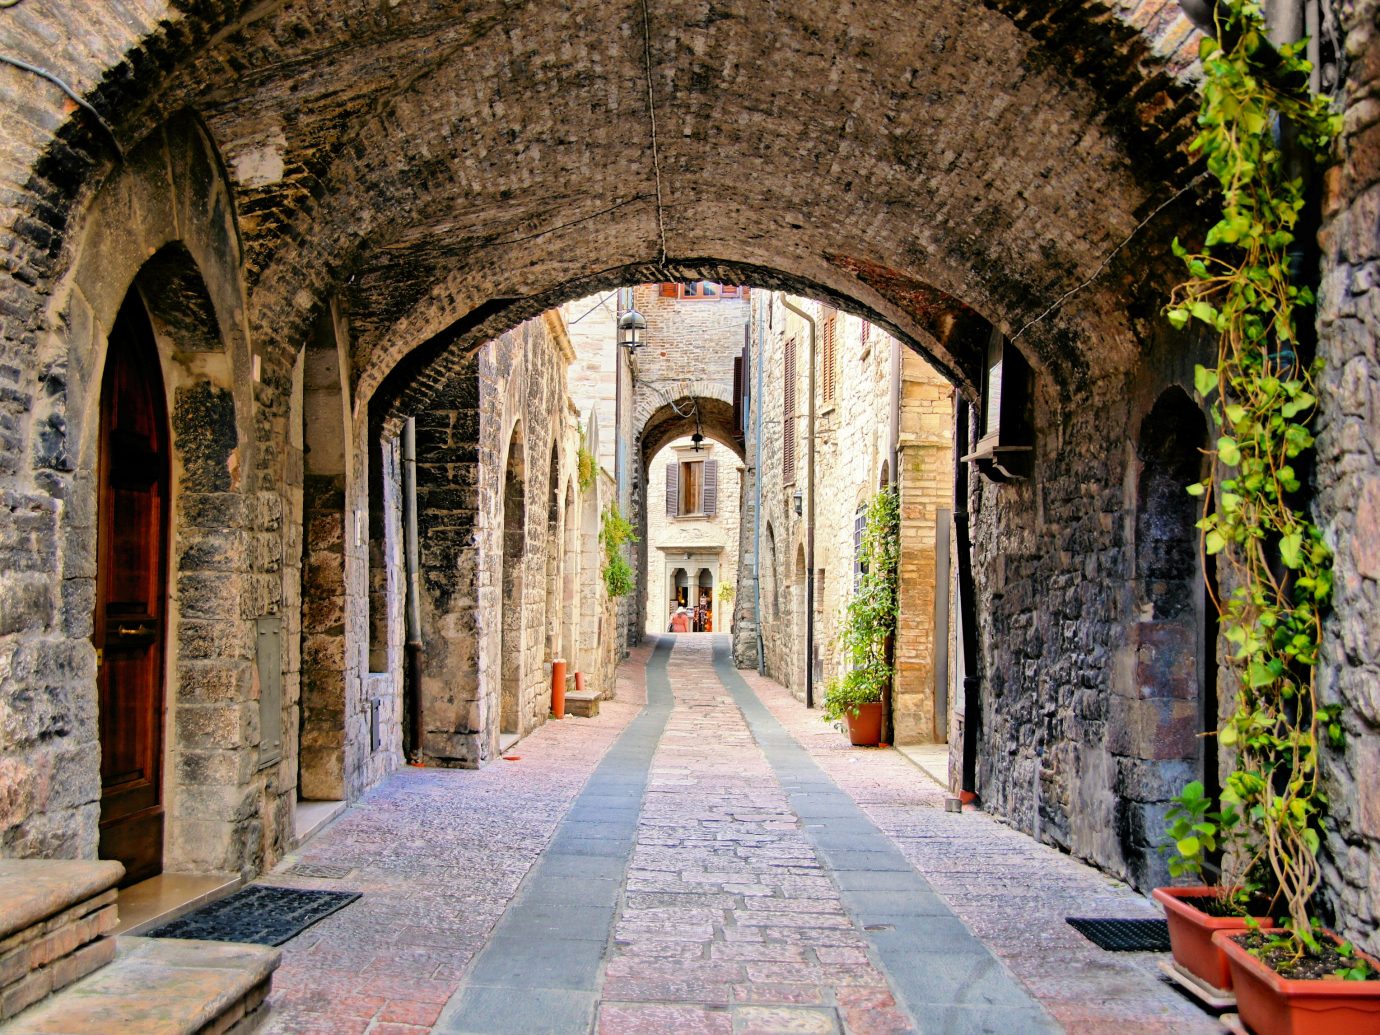 Trip Ideas building ground outdoor arch stone Town Architecture arcade ancient history tourism monastery estate Courtyard alley place of worship aisle middle ages chapel abbey temple walkway colonnade